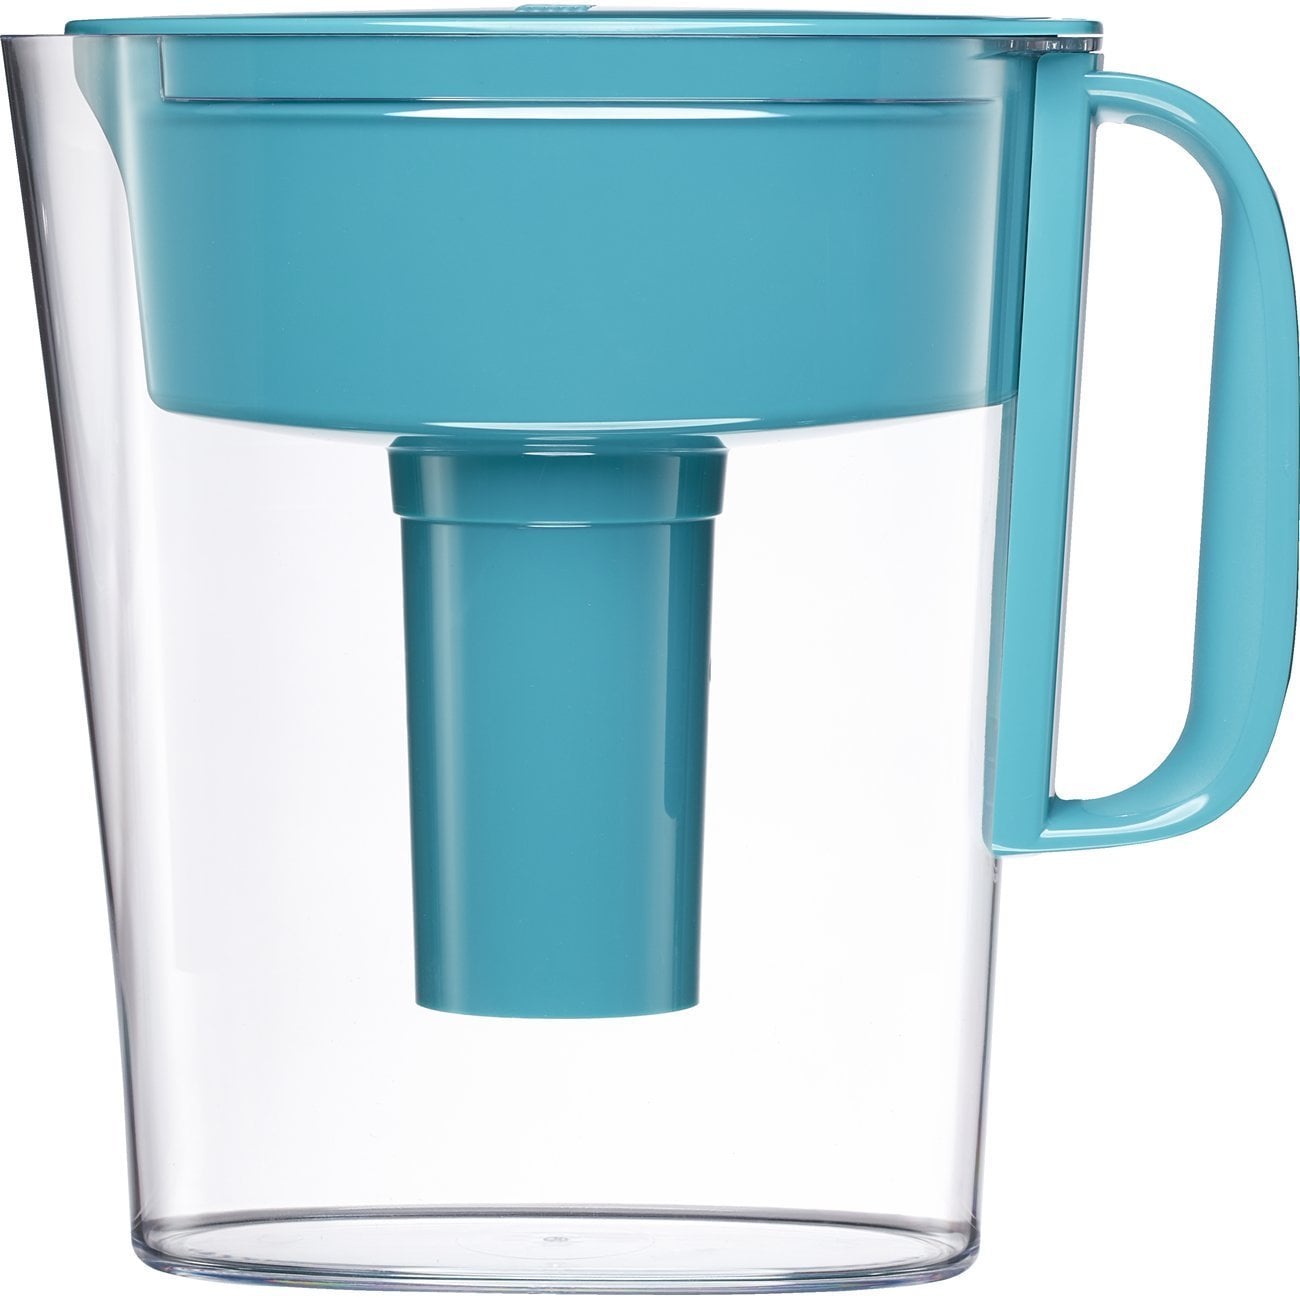 Gold Box - Brita Small 5 Cup Metro Water Pitcher with